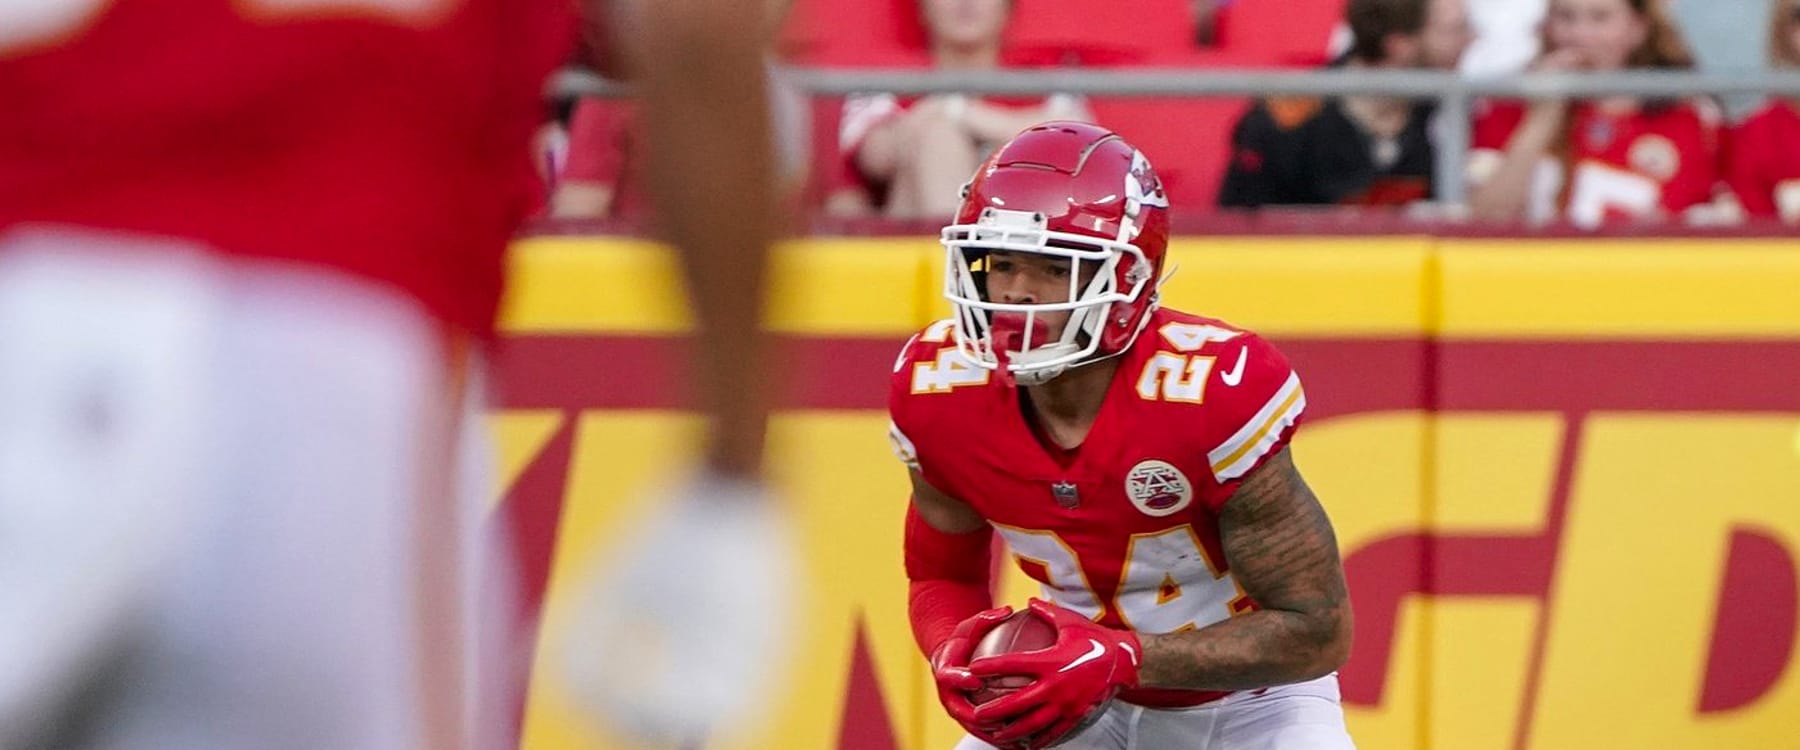 NFL Draft results 2022: Chiefs select WR Skyy Moore with No. 54